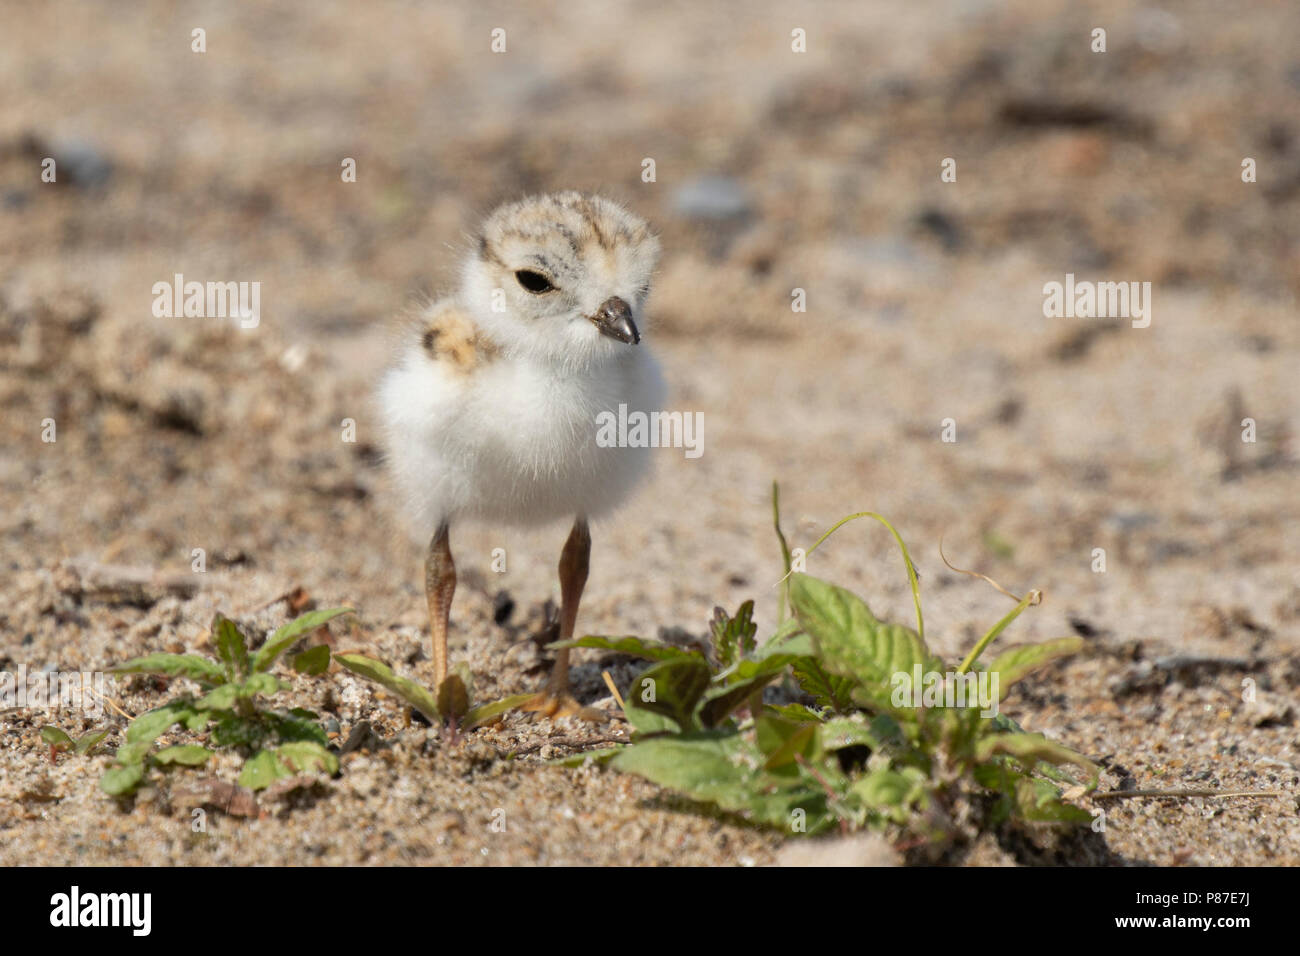 A well camouflaged endangered piping plover (Charadrius melodus) chick foraging on a beach close to downtown Toronto, ON, Canada. Stock Photo